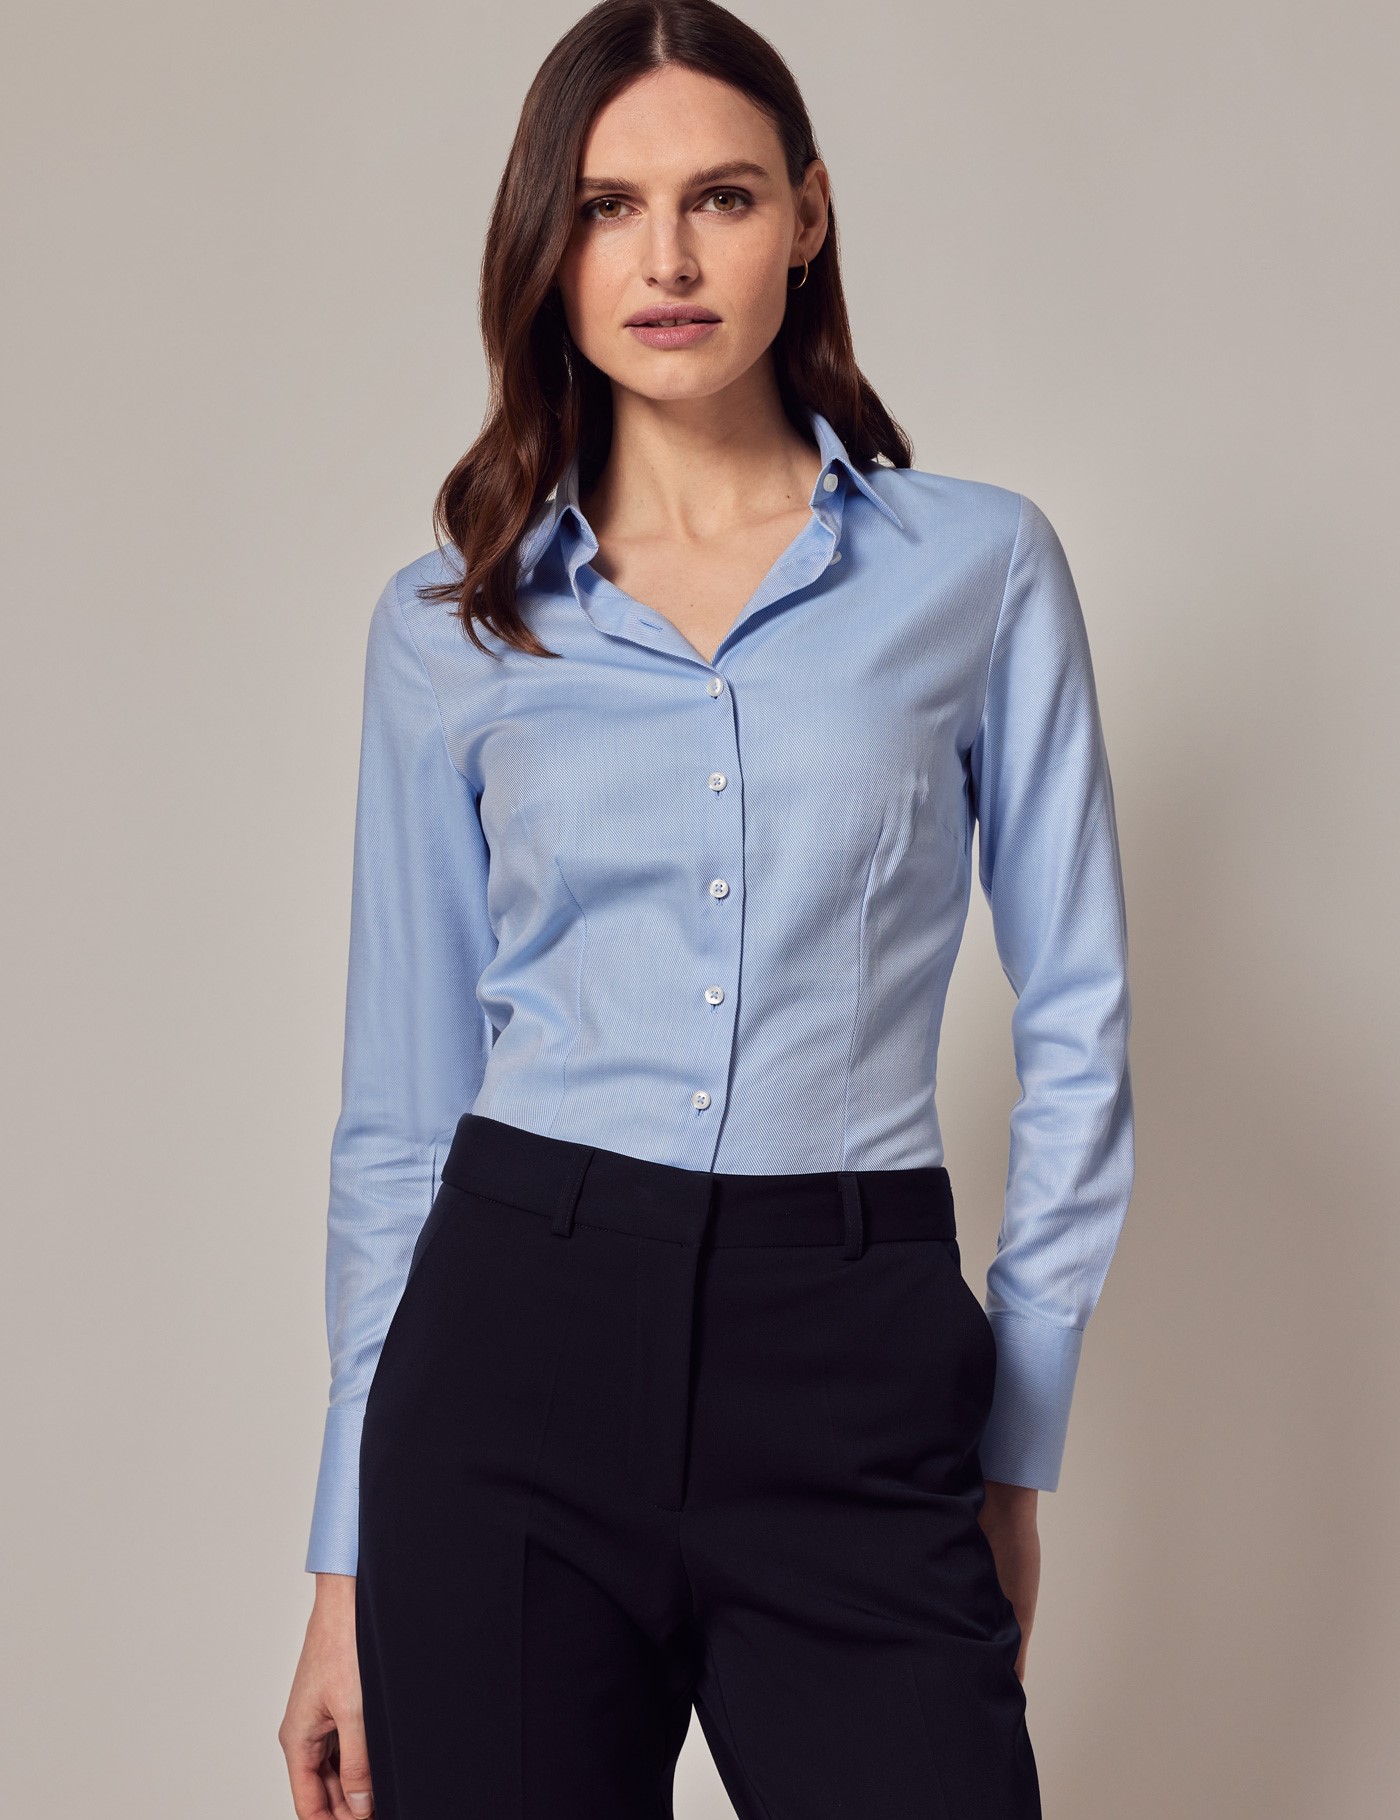 Gronden Besnoeiing oorlog Easy Iron Twill Women's Executive Shirt with Single Cuffs in Light Blue |  Hawes & Curtis | USA